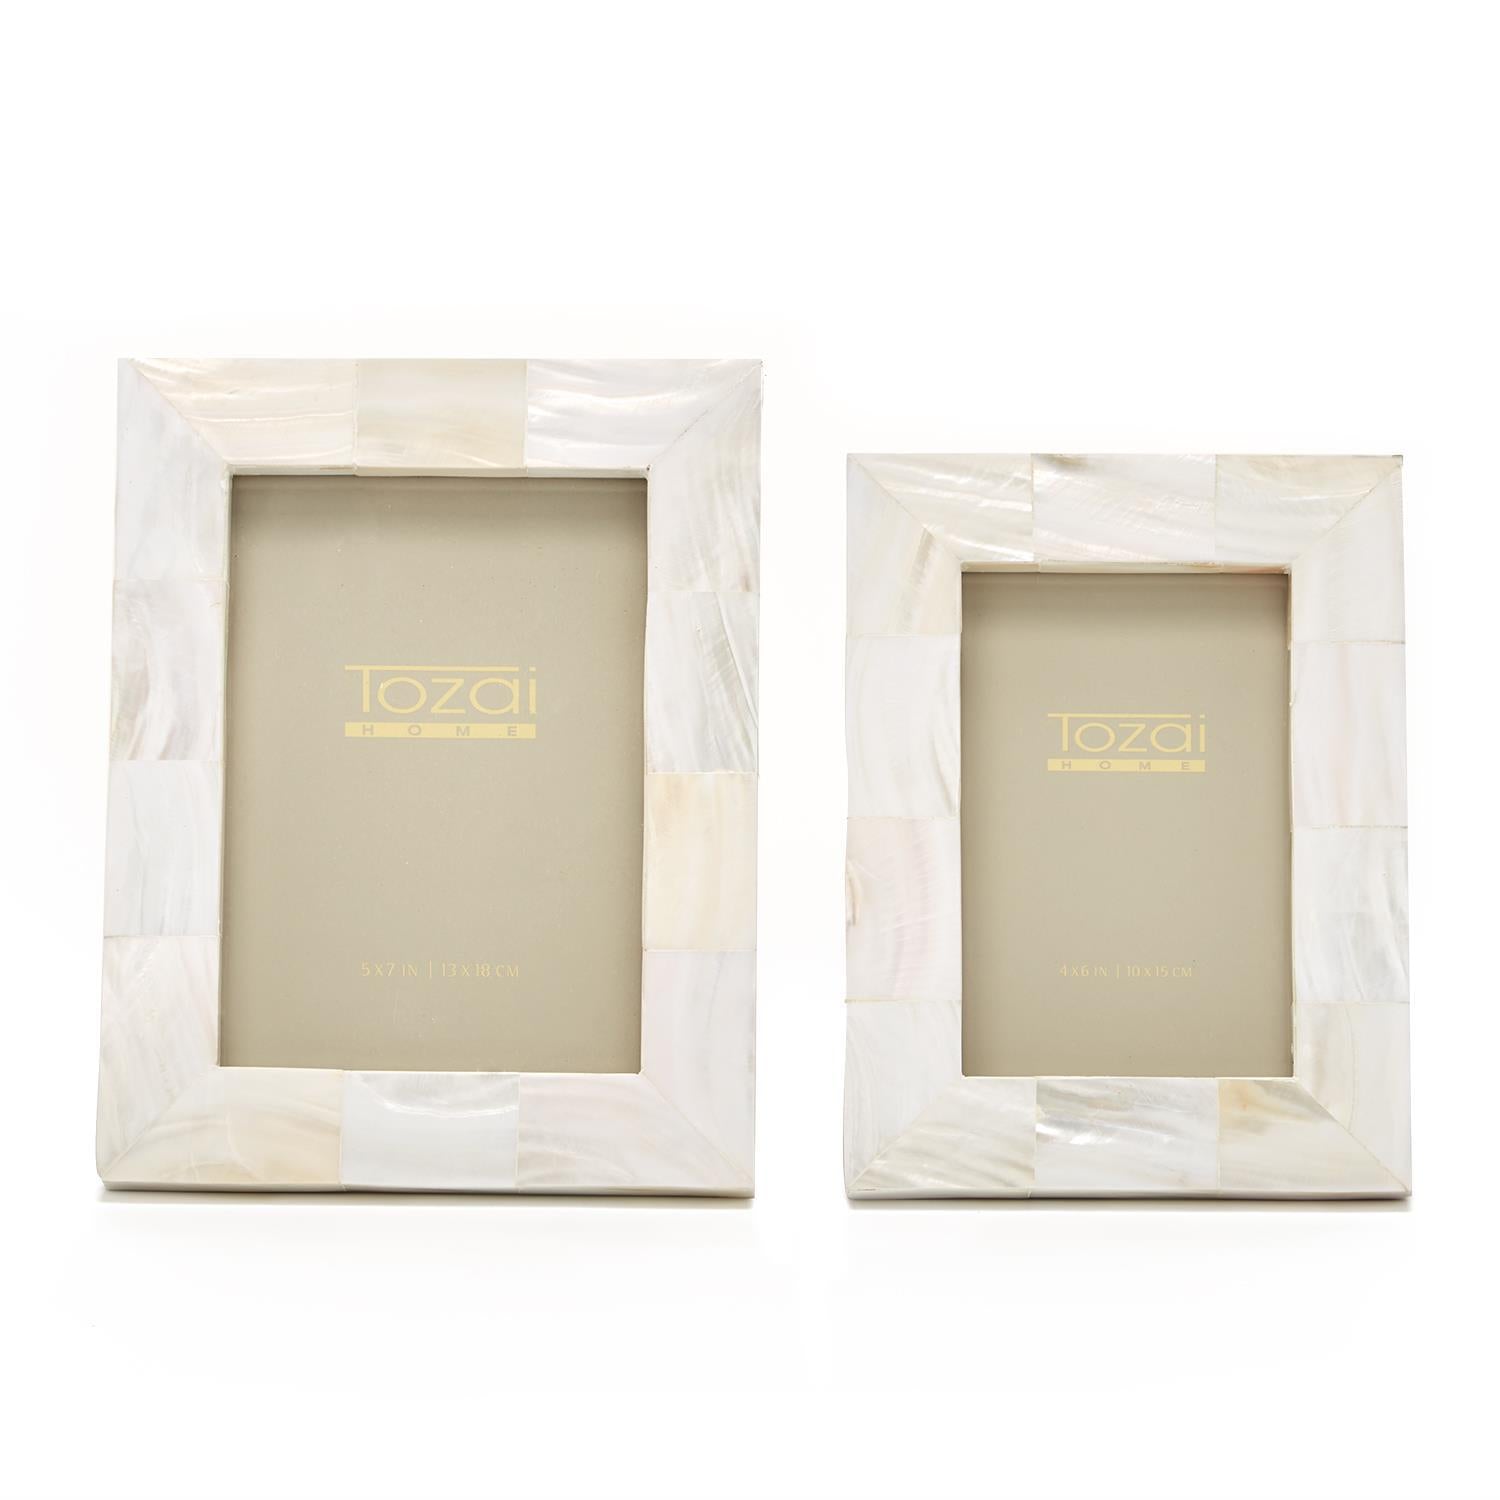 Two's Company Pearly White Photo Frames in Gift Box (includes 2 Sizes: 4 x 6 and 5 x 7)